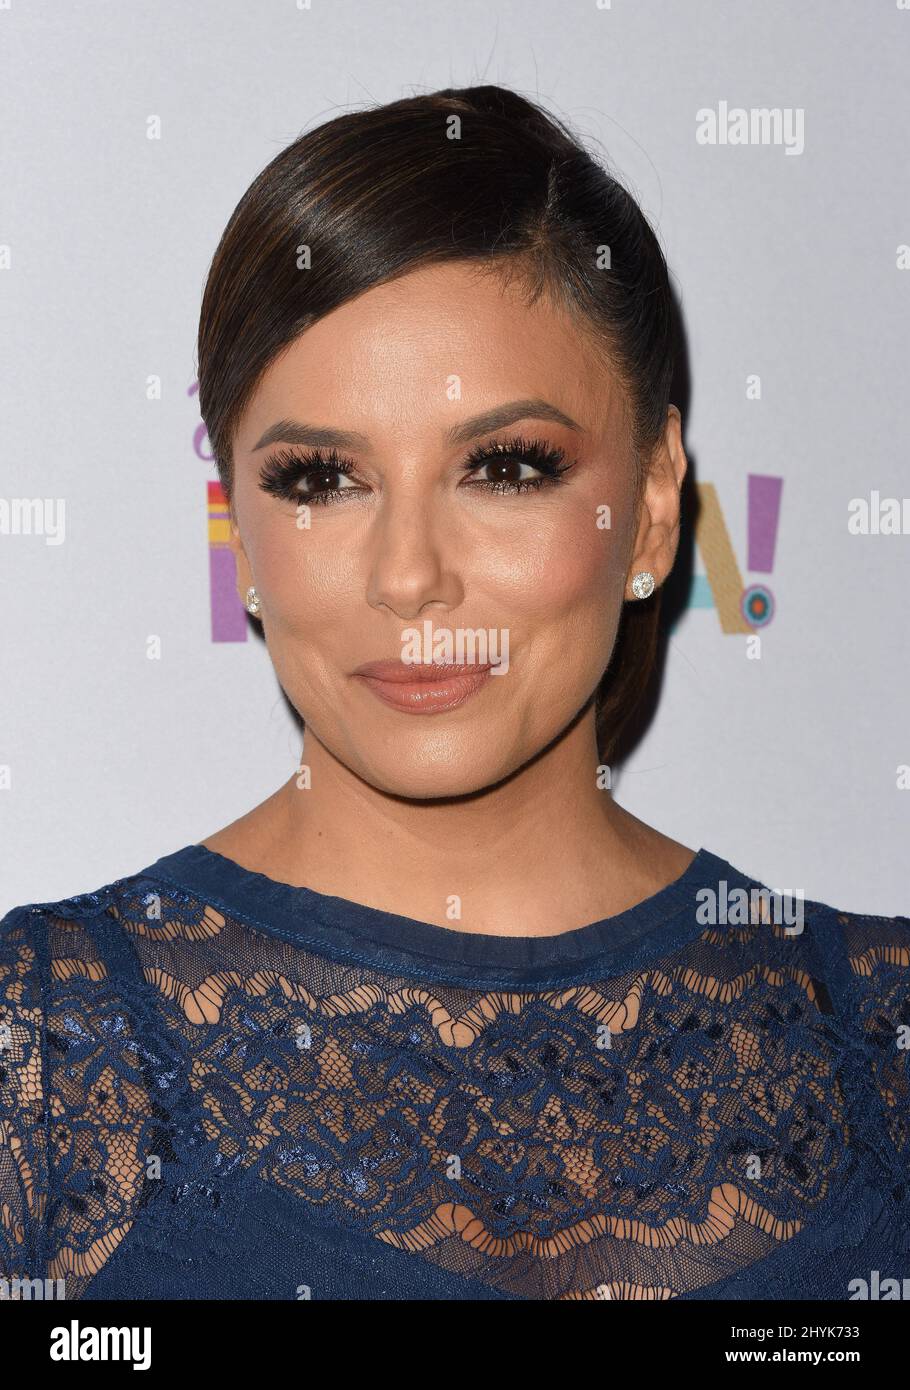 Eva Longoria at The Farrah Fawcett Foundation's Tex-Mex Fiesta held at the Wallis Annenberg Center for the Performing Arts on September 6, 2019 in Beverly Hills, USA. Stock Photo